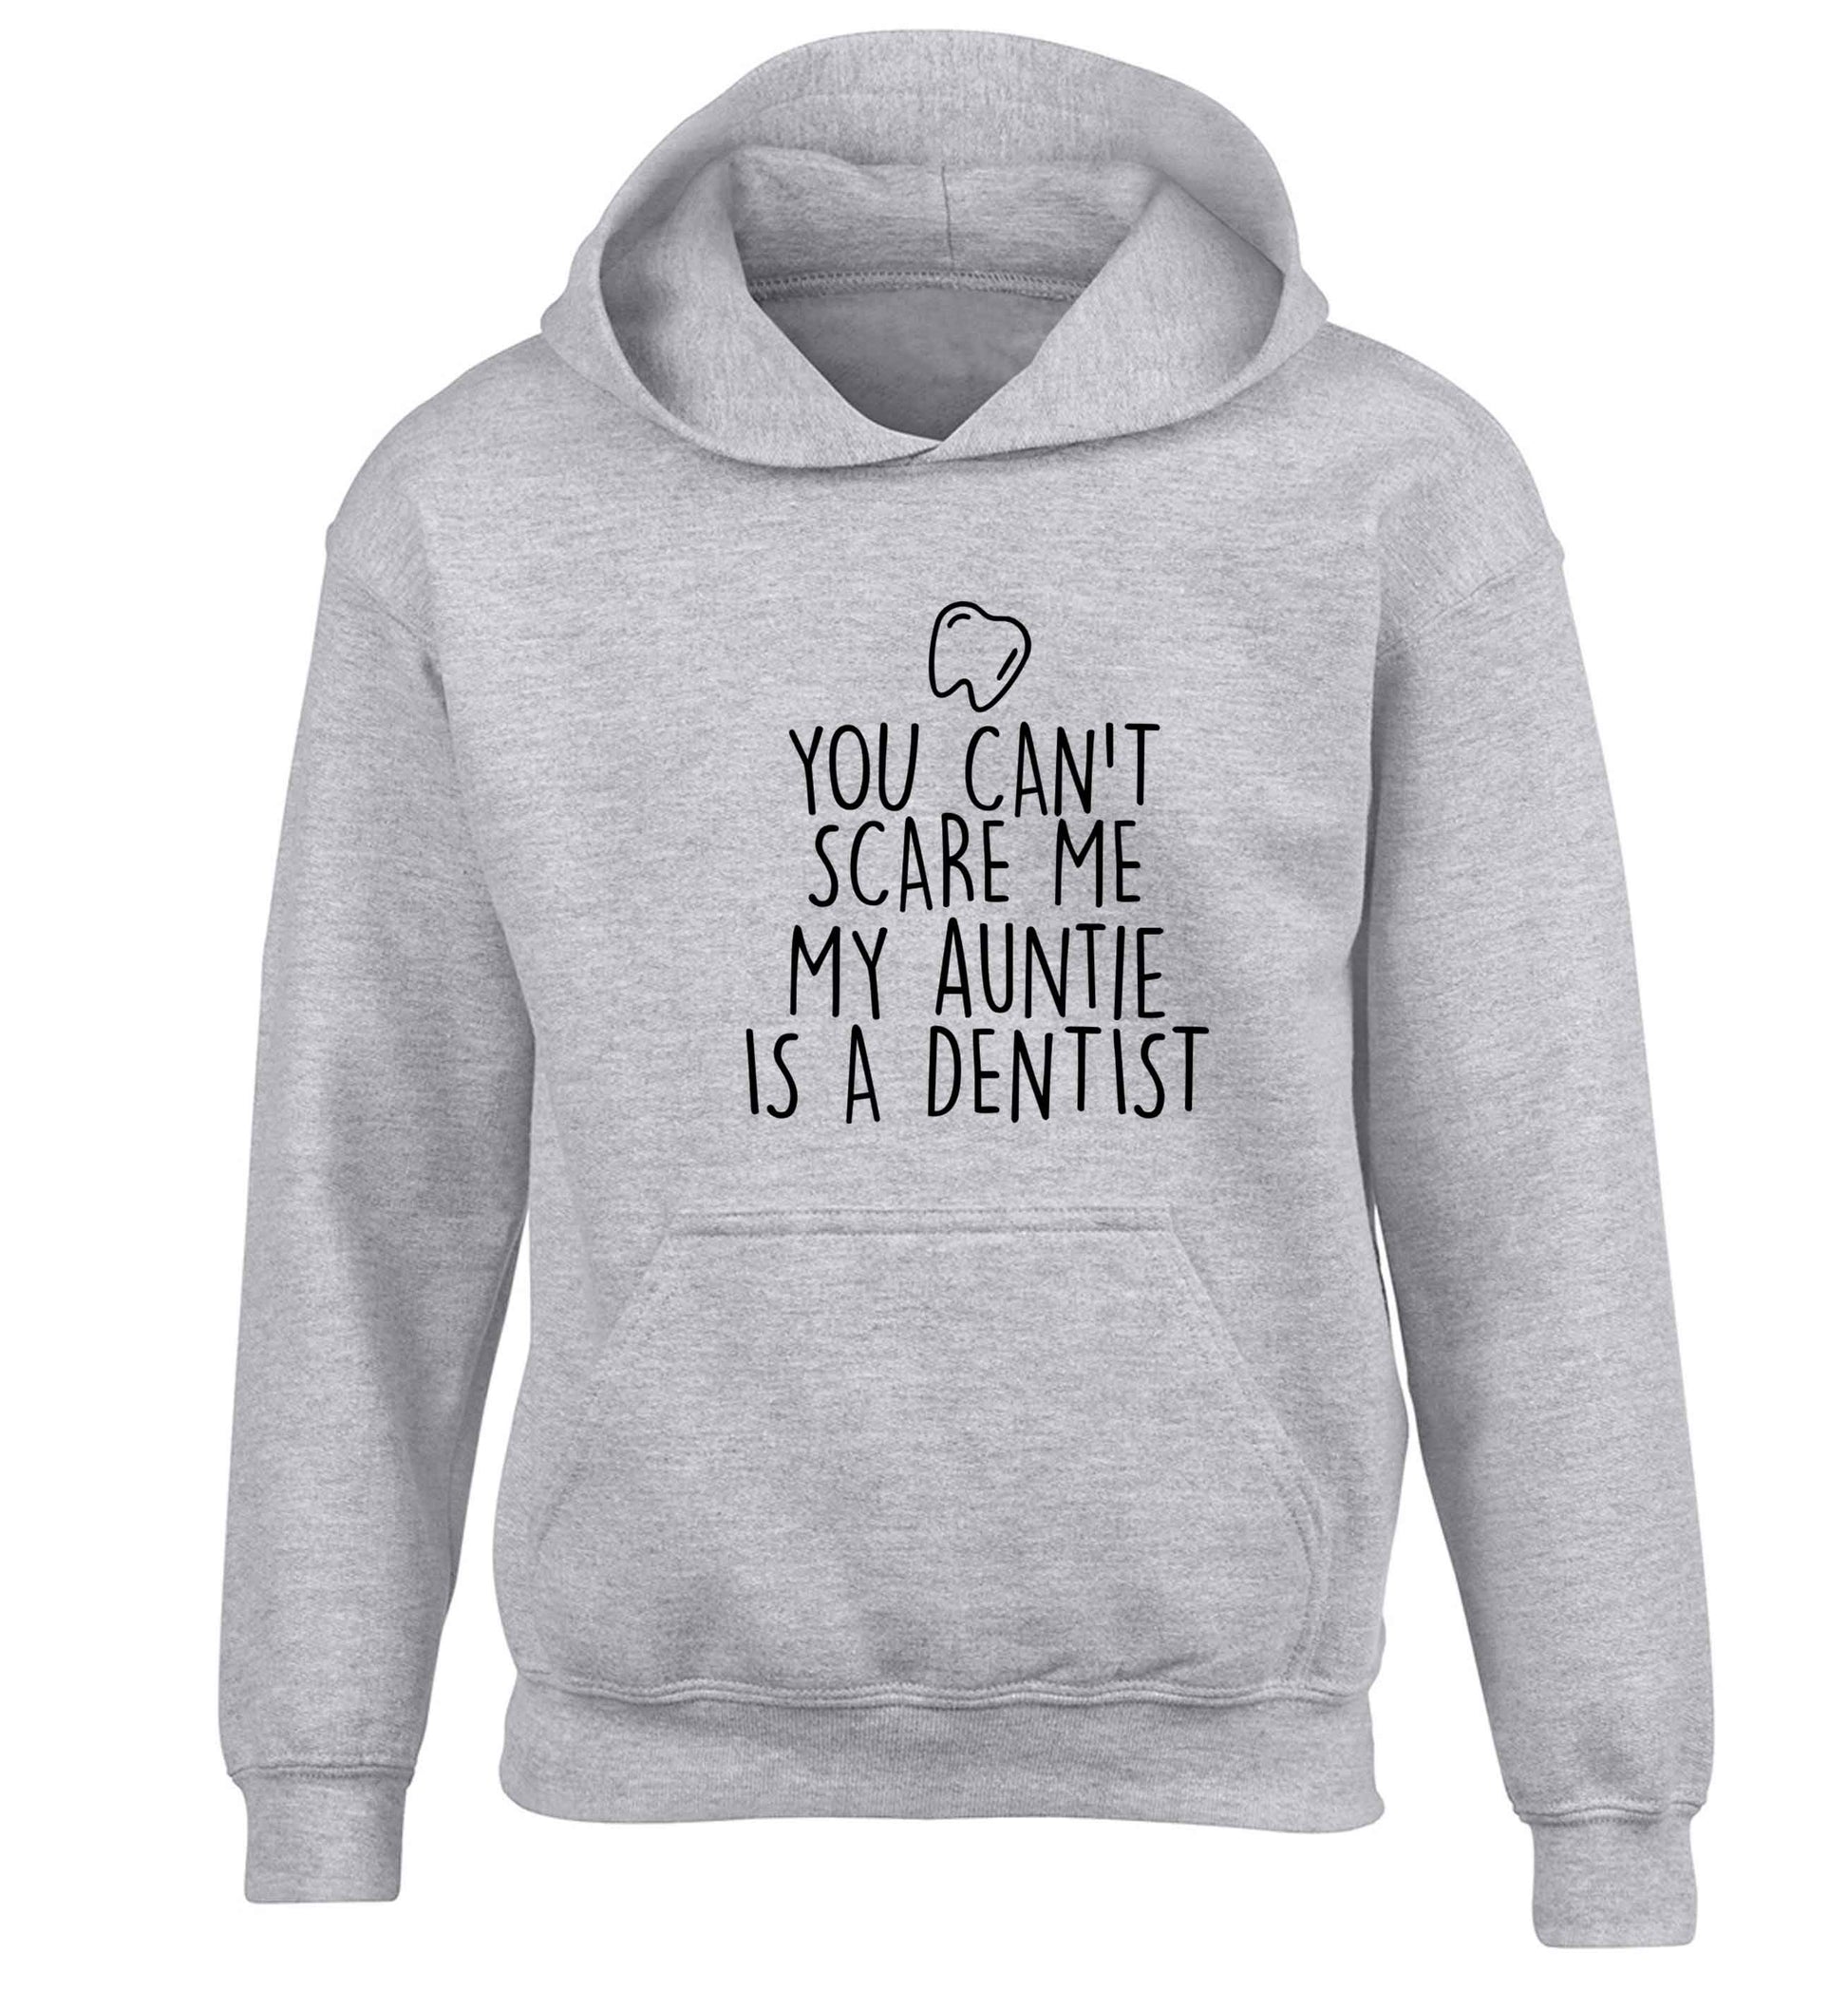 You can't scare me my auntie is a dentist children's grey hoodie 12-13 Years